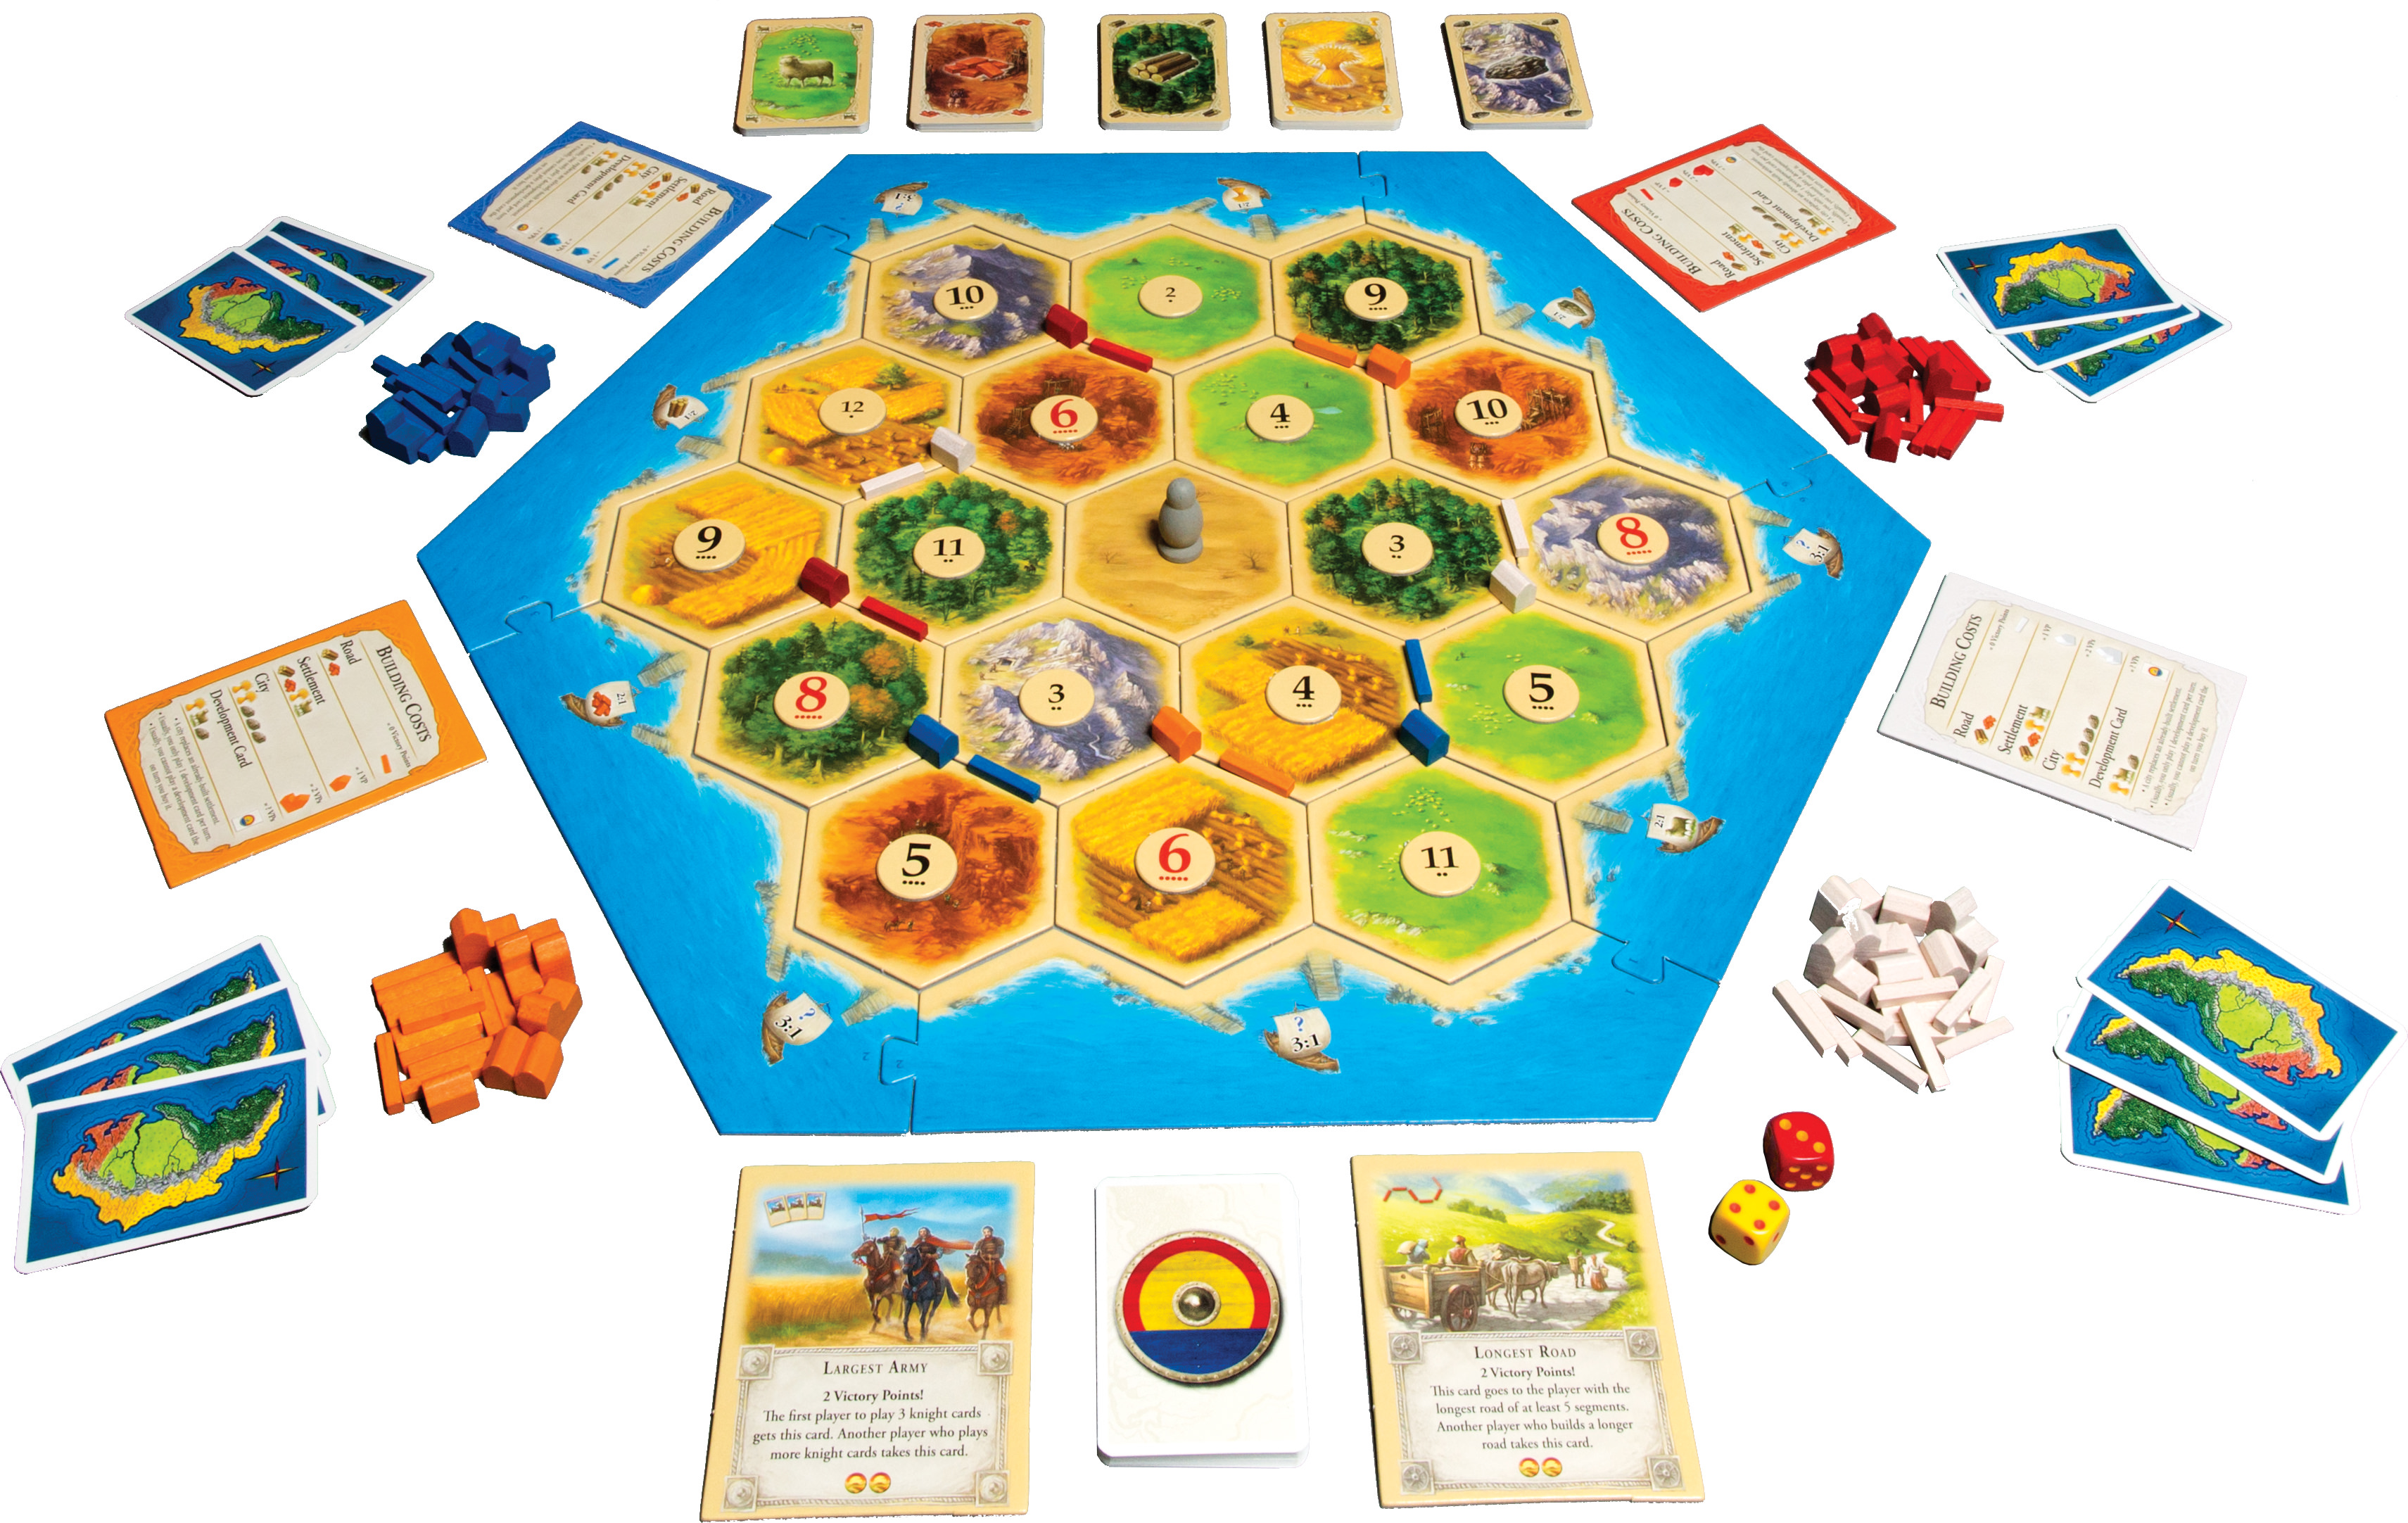 Catan Strategy Board Game: 5th Edition for Ages 10 and up, from Asmodee - image 4 of 7